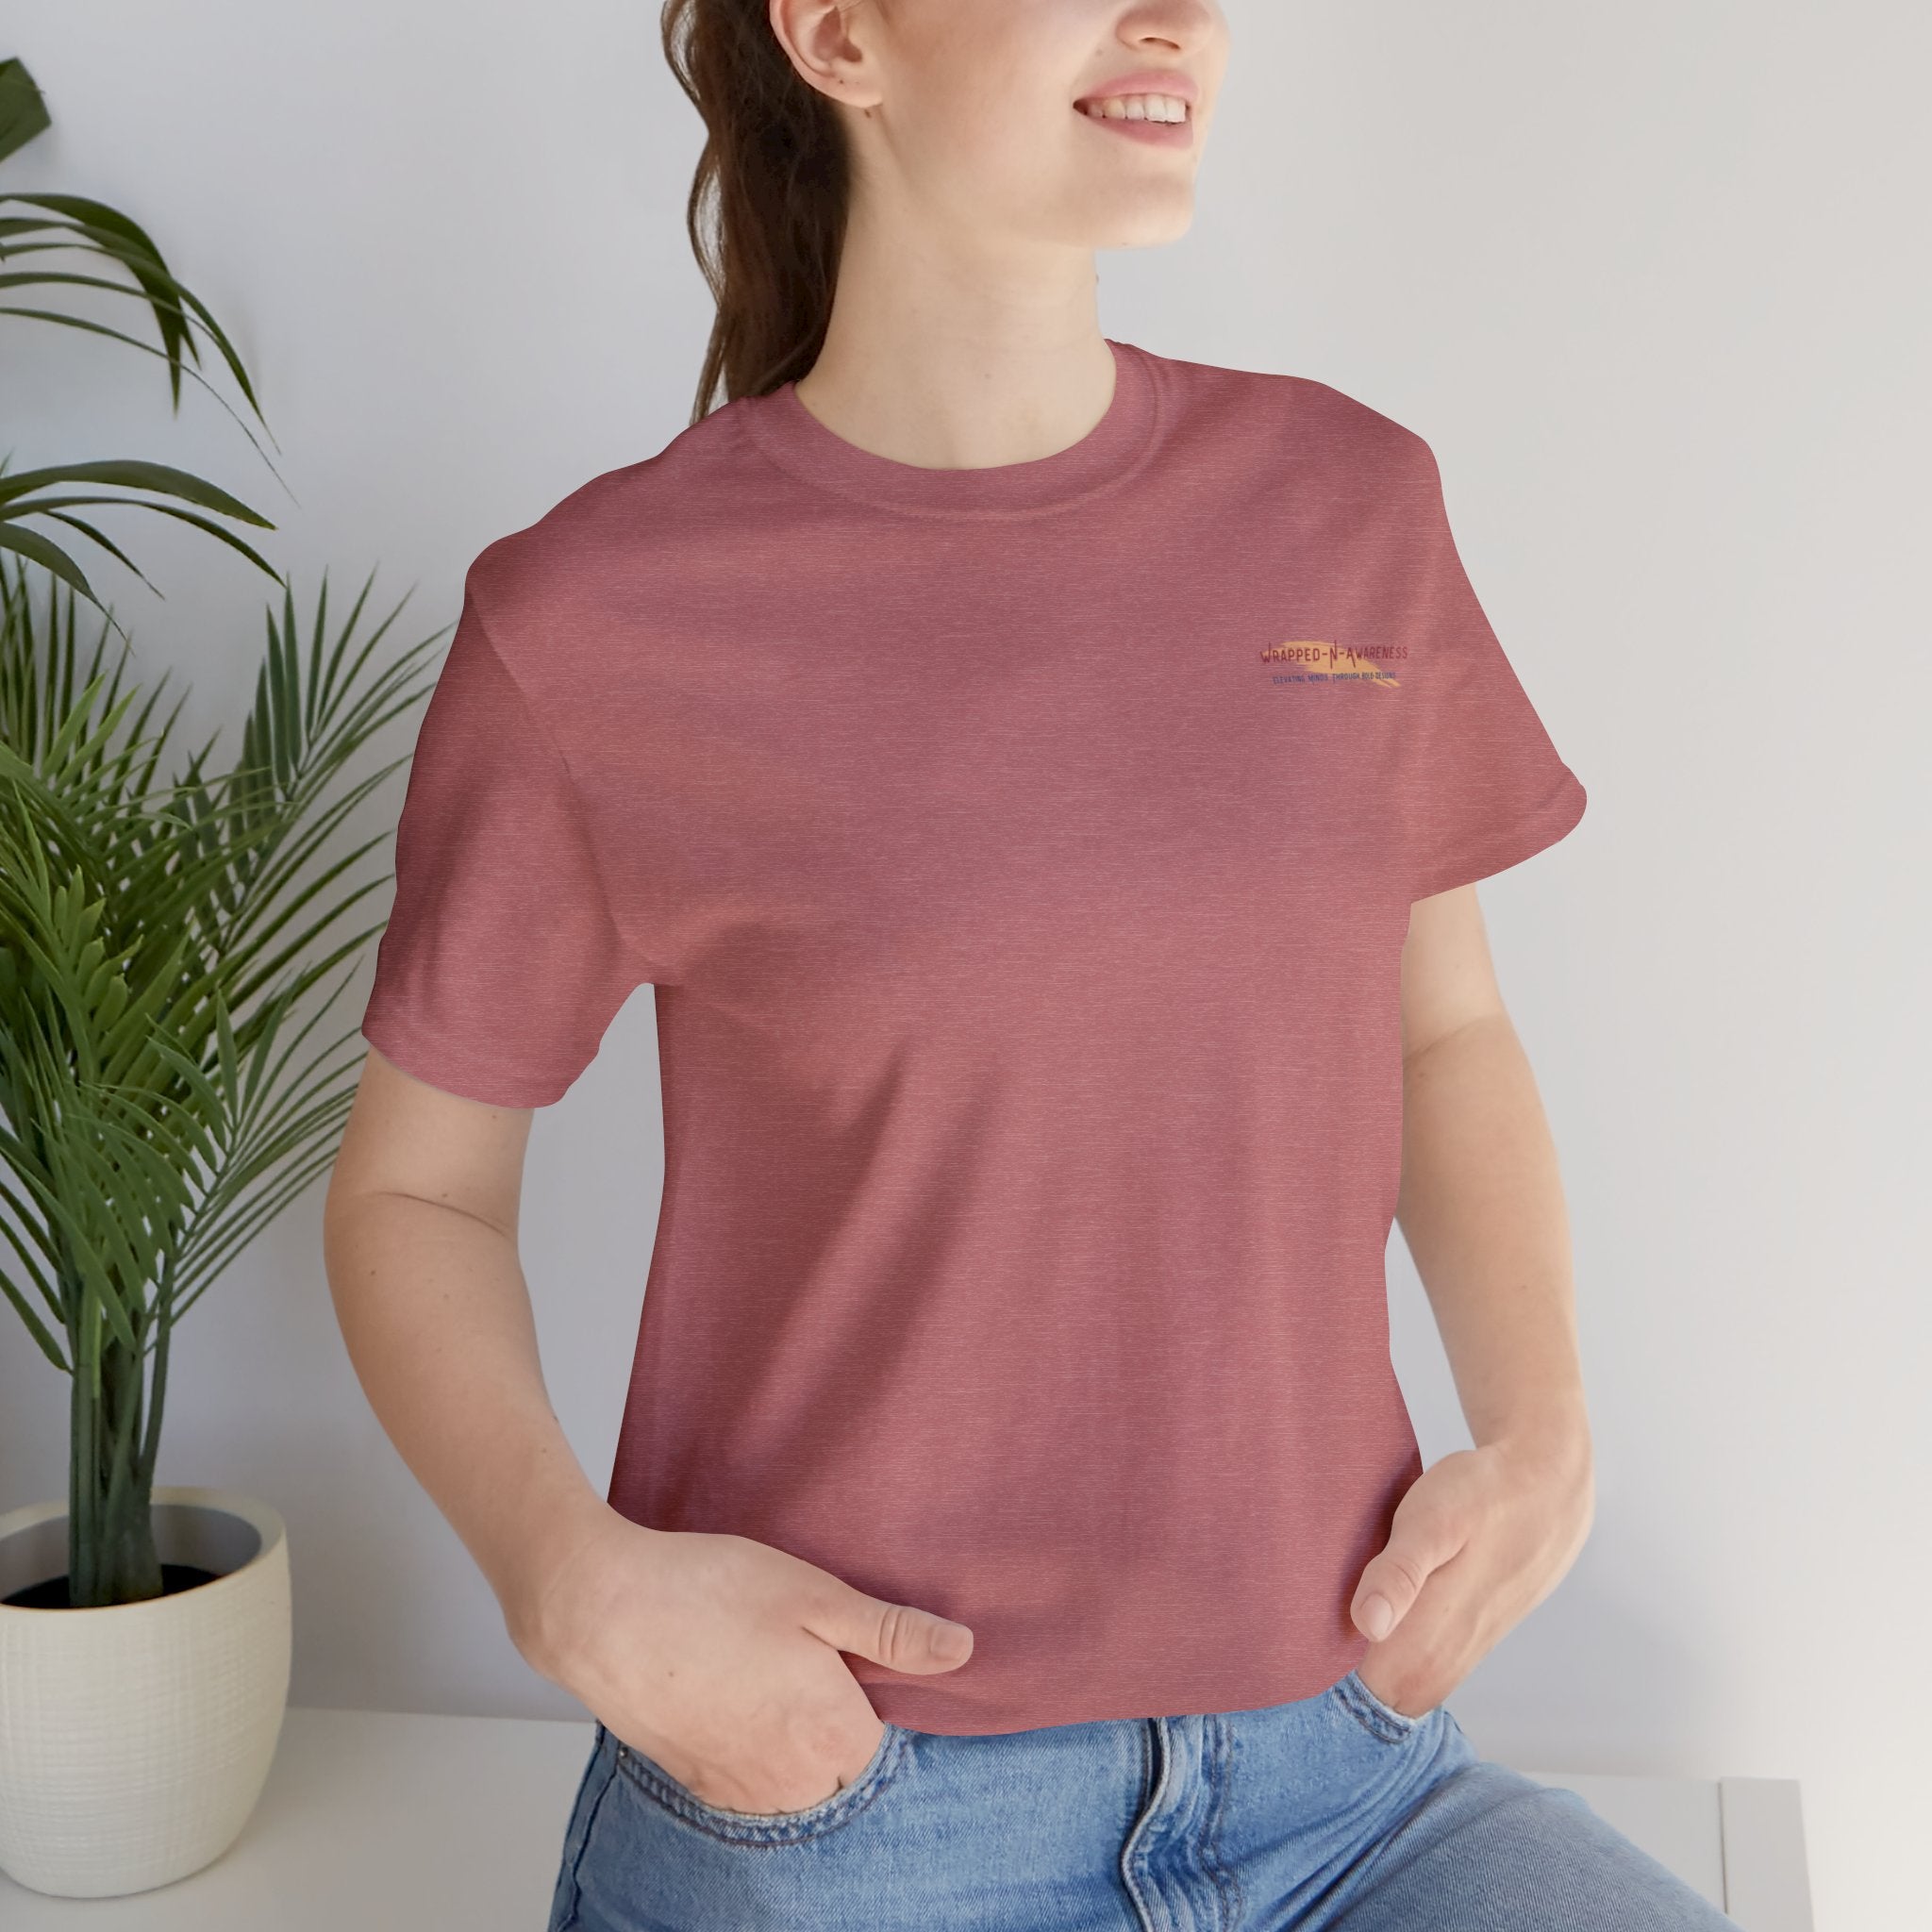 Release Your Mind Jersey Tee - Bella+Canvas 3001 Heather Mauve Airlume Cotton Bella+Canvas 3001 Crew Neckline Jersey Short Sleeve Lightweight Fabric Mental Health Support Retail Fit Tear-away Label Tee Unisex Tee T-Shirt 12571640927366125053_2048 Printify